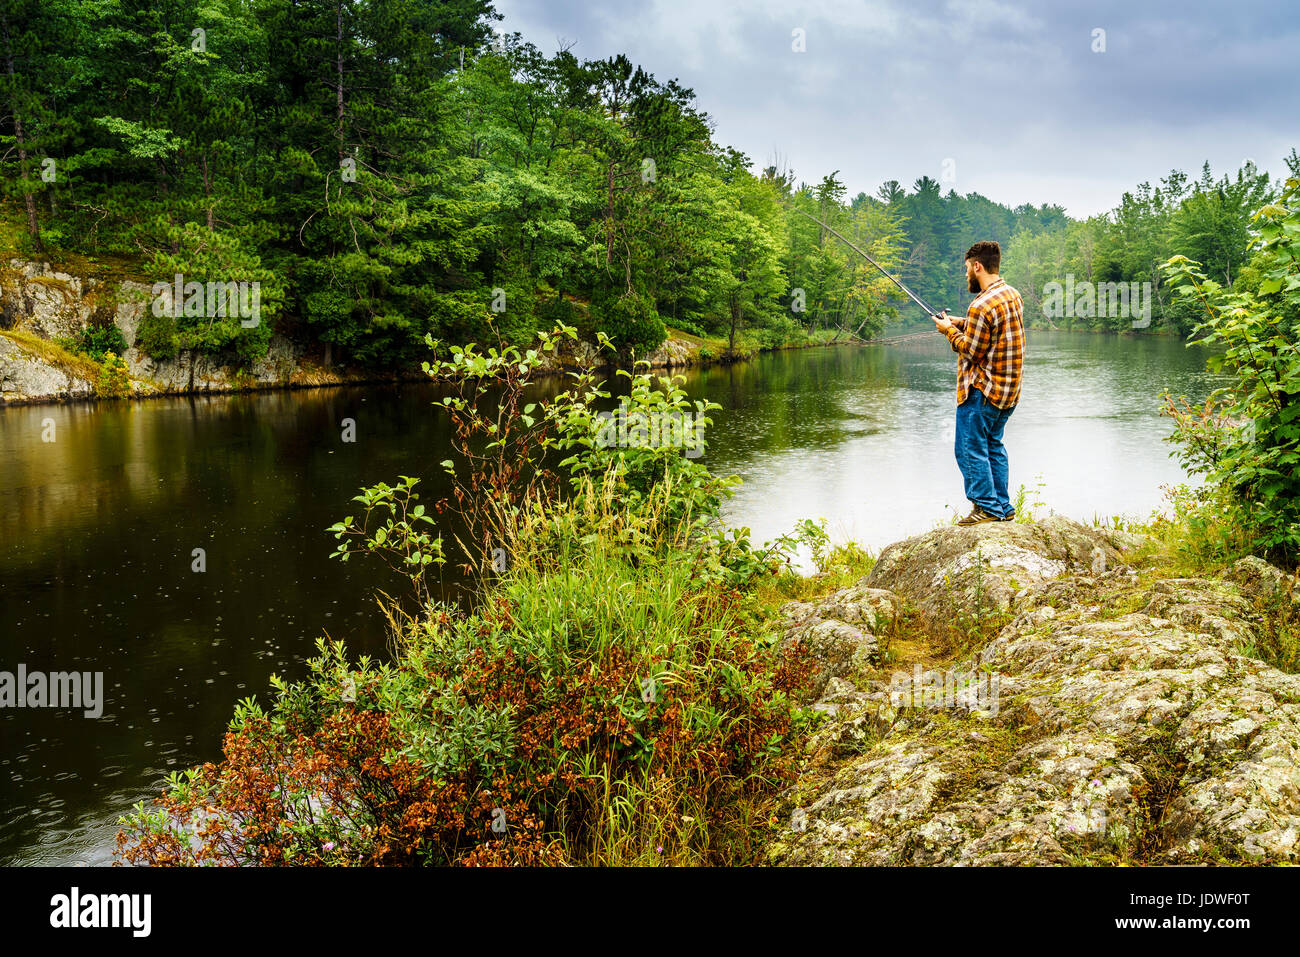 Upper Peninsula, Michigan, August 11, 2016: a dedicated angler is fishing on a river near Marquette, Michigan Stock Photo